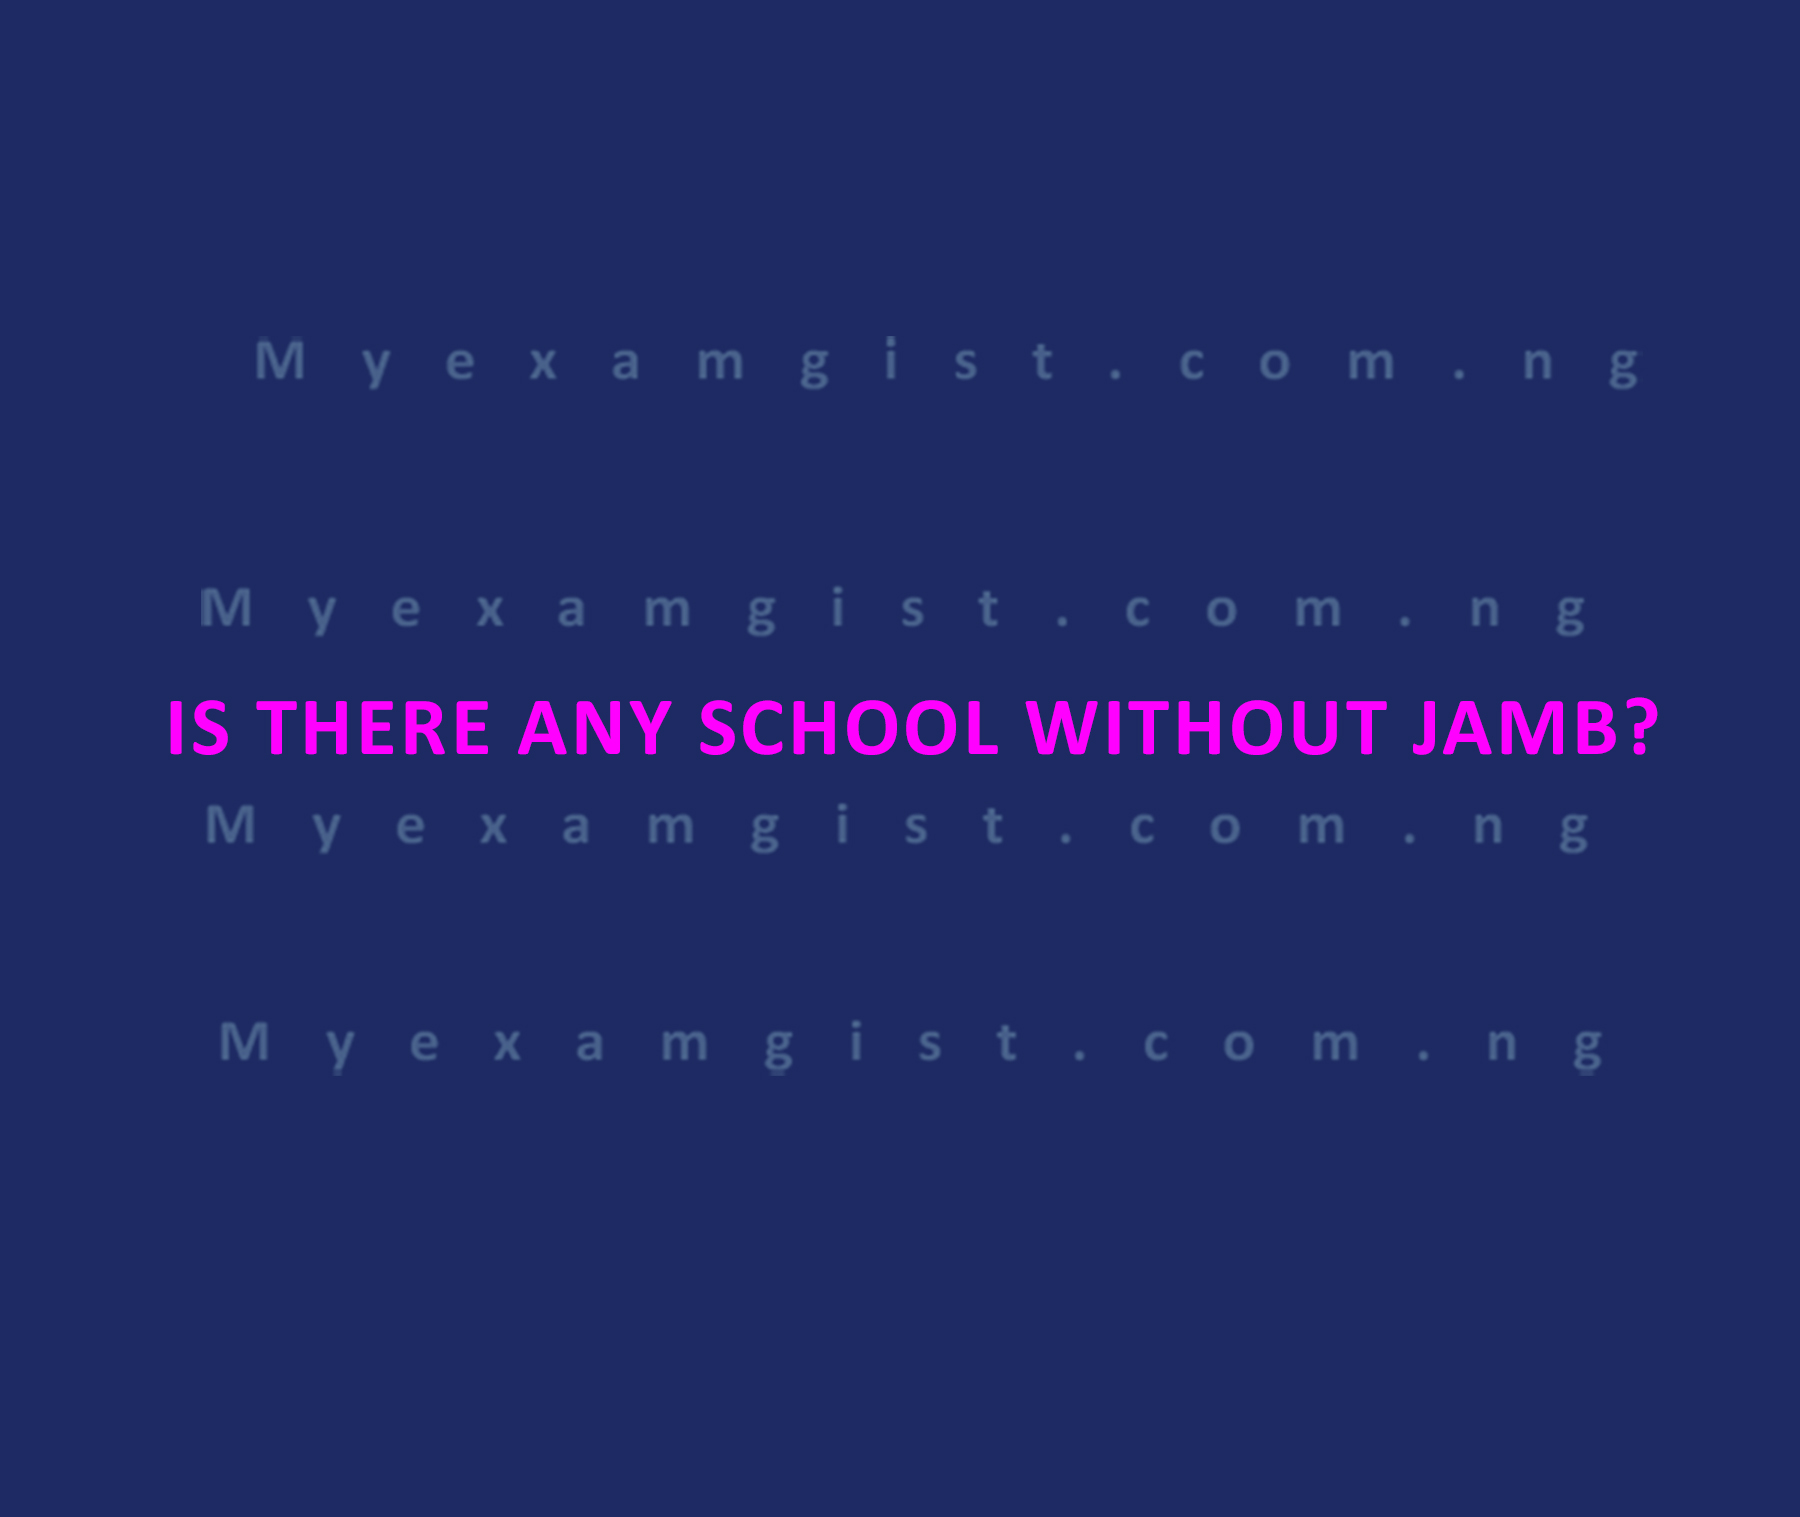 Is there any school without JAMB?